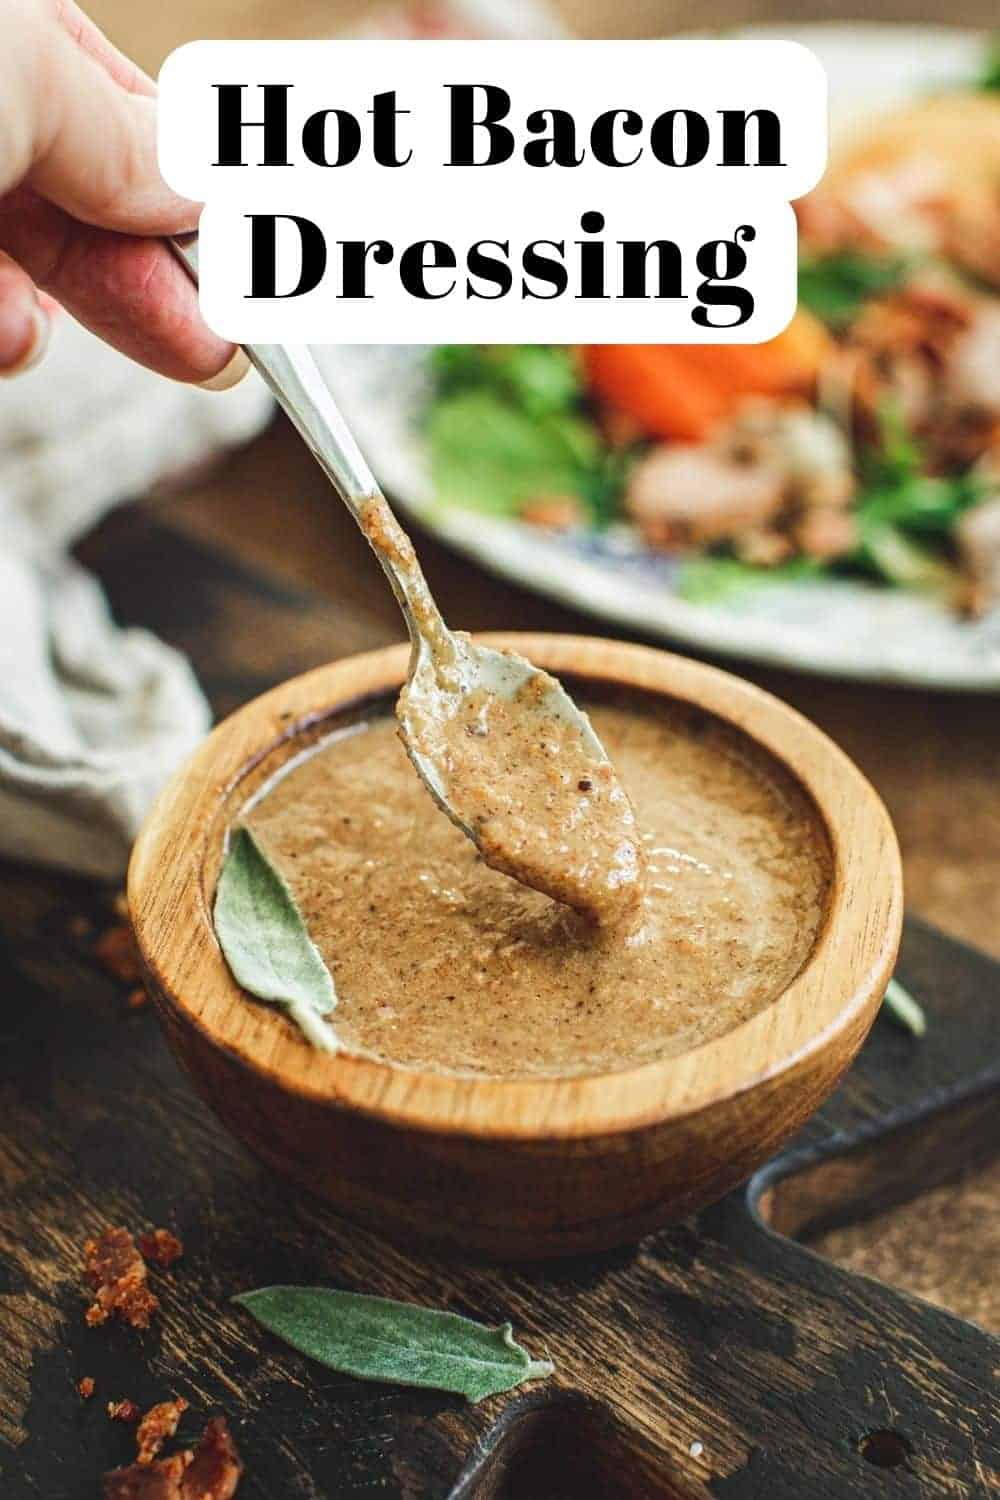 Hot bacon dressing recipe in a wooden bowl with a silver serving spoon.